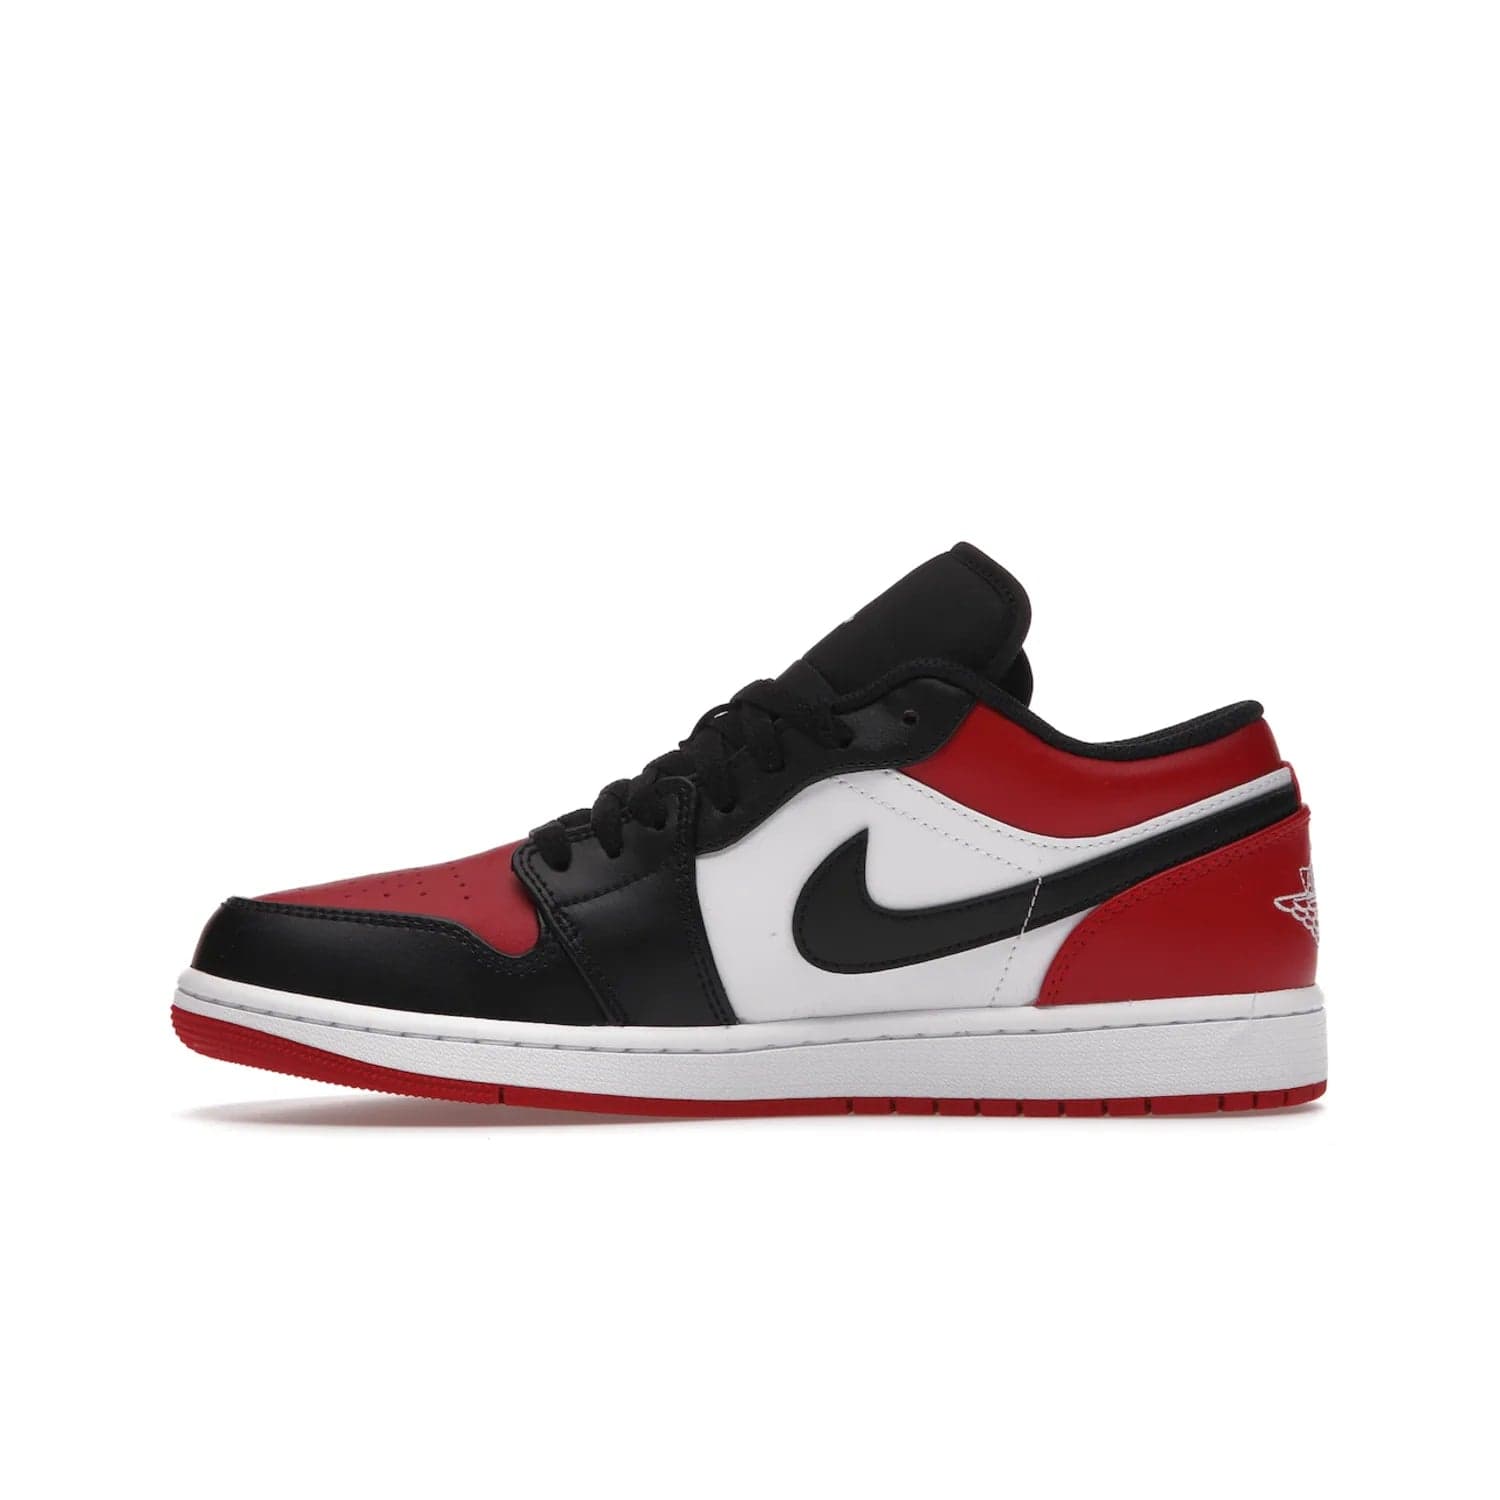 Jordan 1 Low Bred Toe - Image 19 - Only at www.BallersClubKickz.com - Step into the iconic Jordan 1 Retro. Mixing and matching of leather in red, black, and white makes for a unique colorway. Finished off with a Wing logo embroidery & Jumpman label. Comfortable and stylish at an affordable $100, the Jordan 1 Low Bred Toe is perfect for any true sneaker fan.